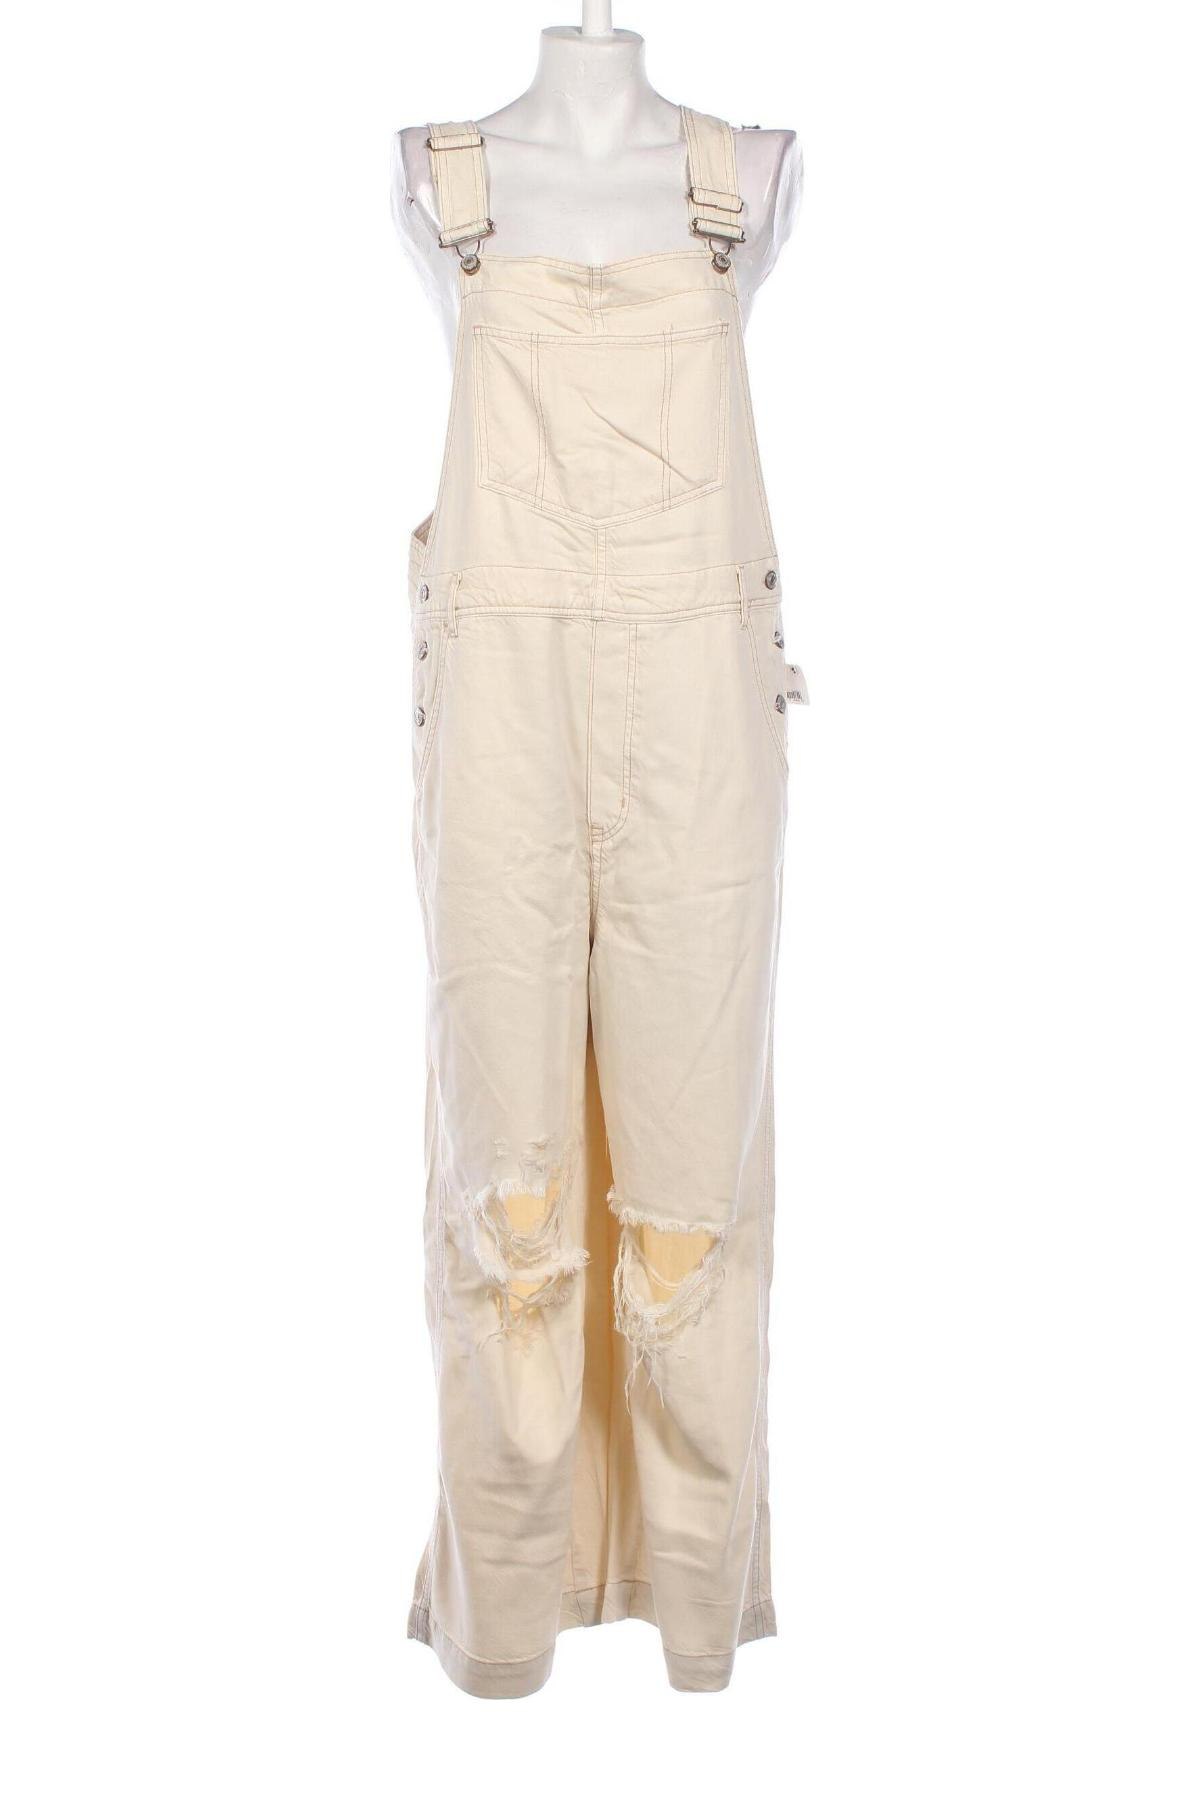 Damen Overall We The Free by Free People, Größe M, Farbe Ecru, Preis 56,51 €